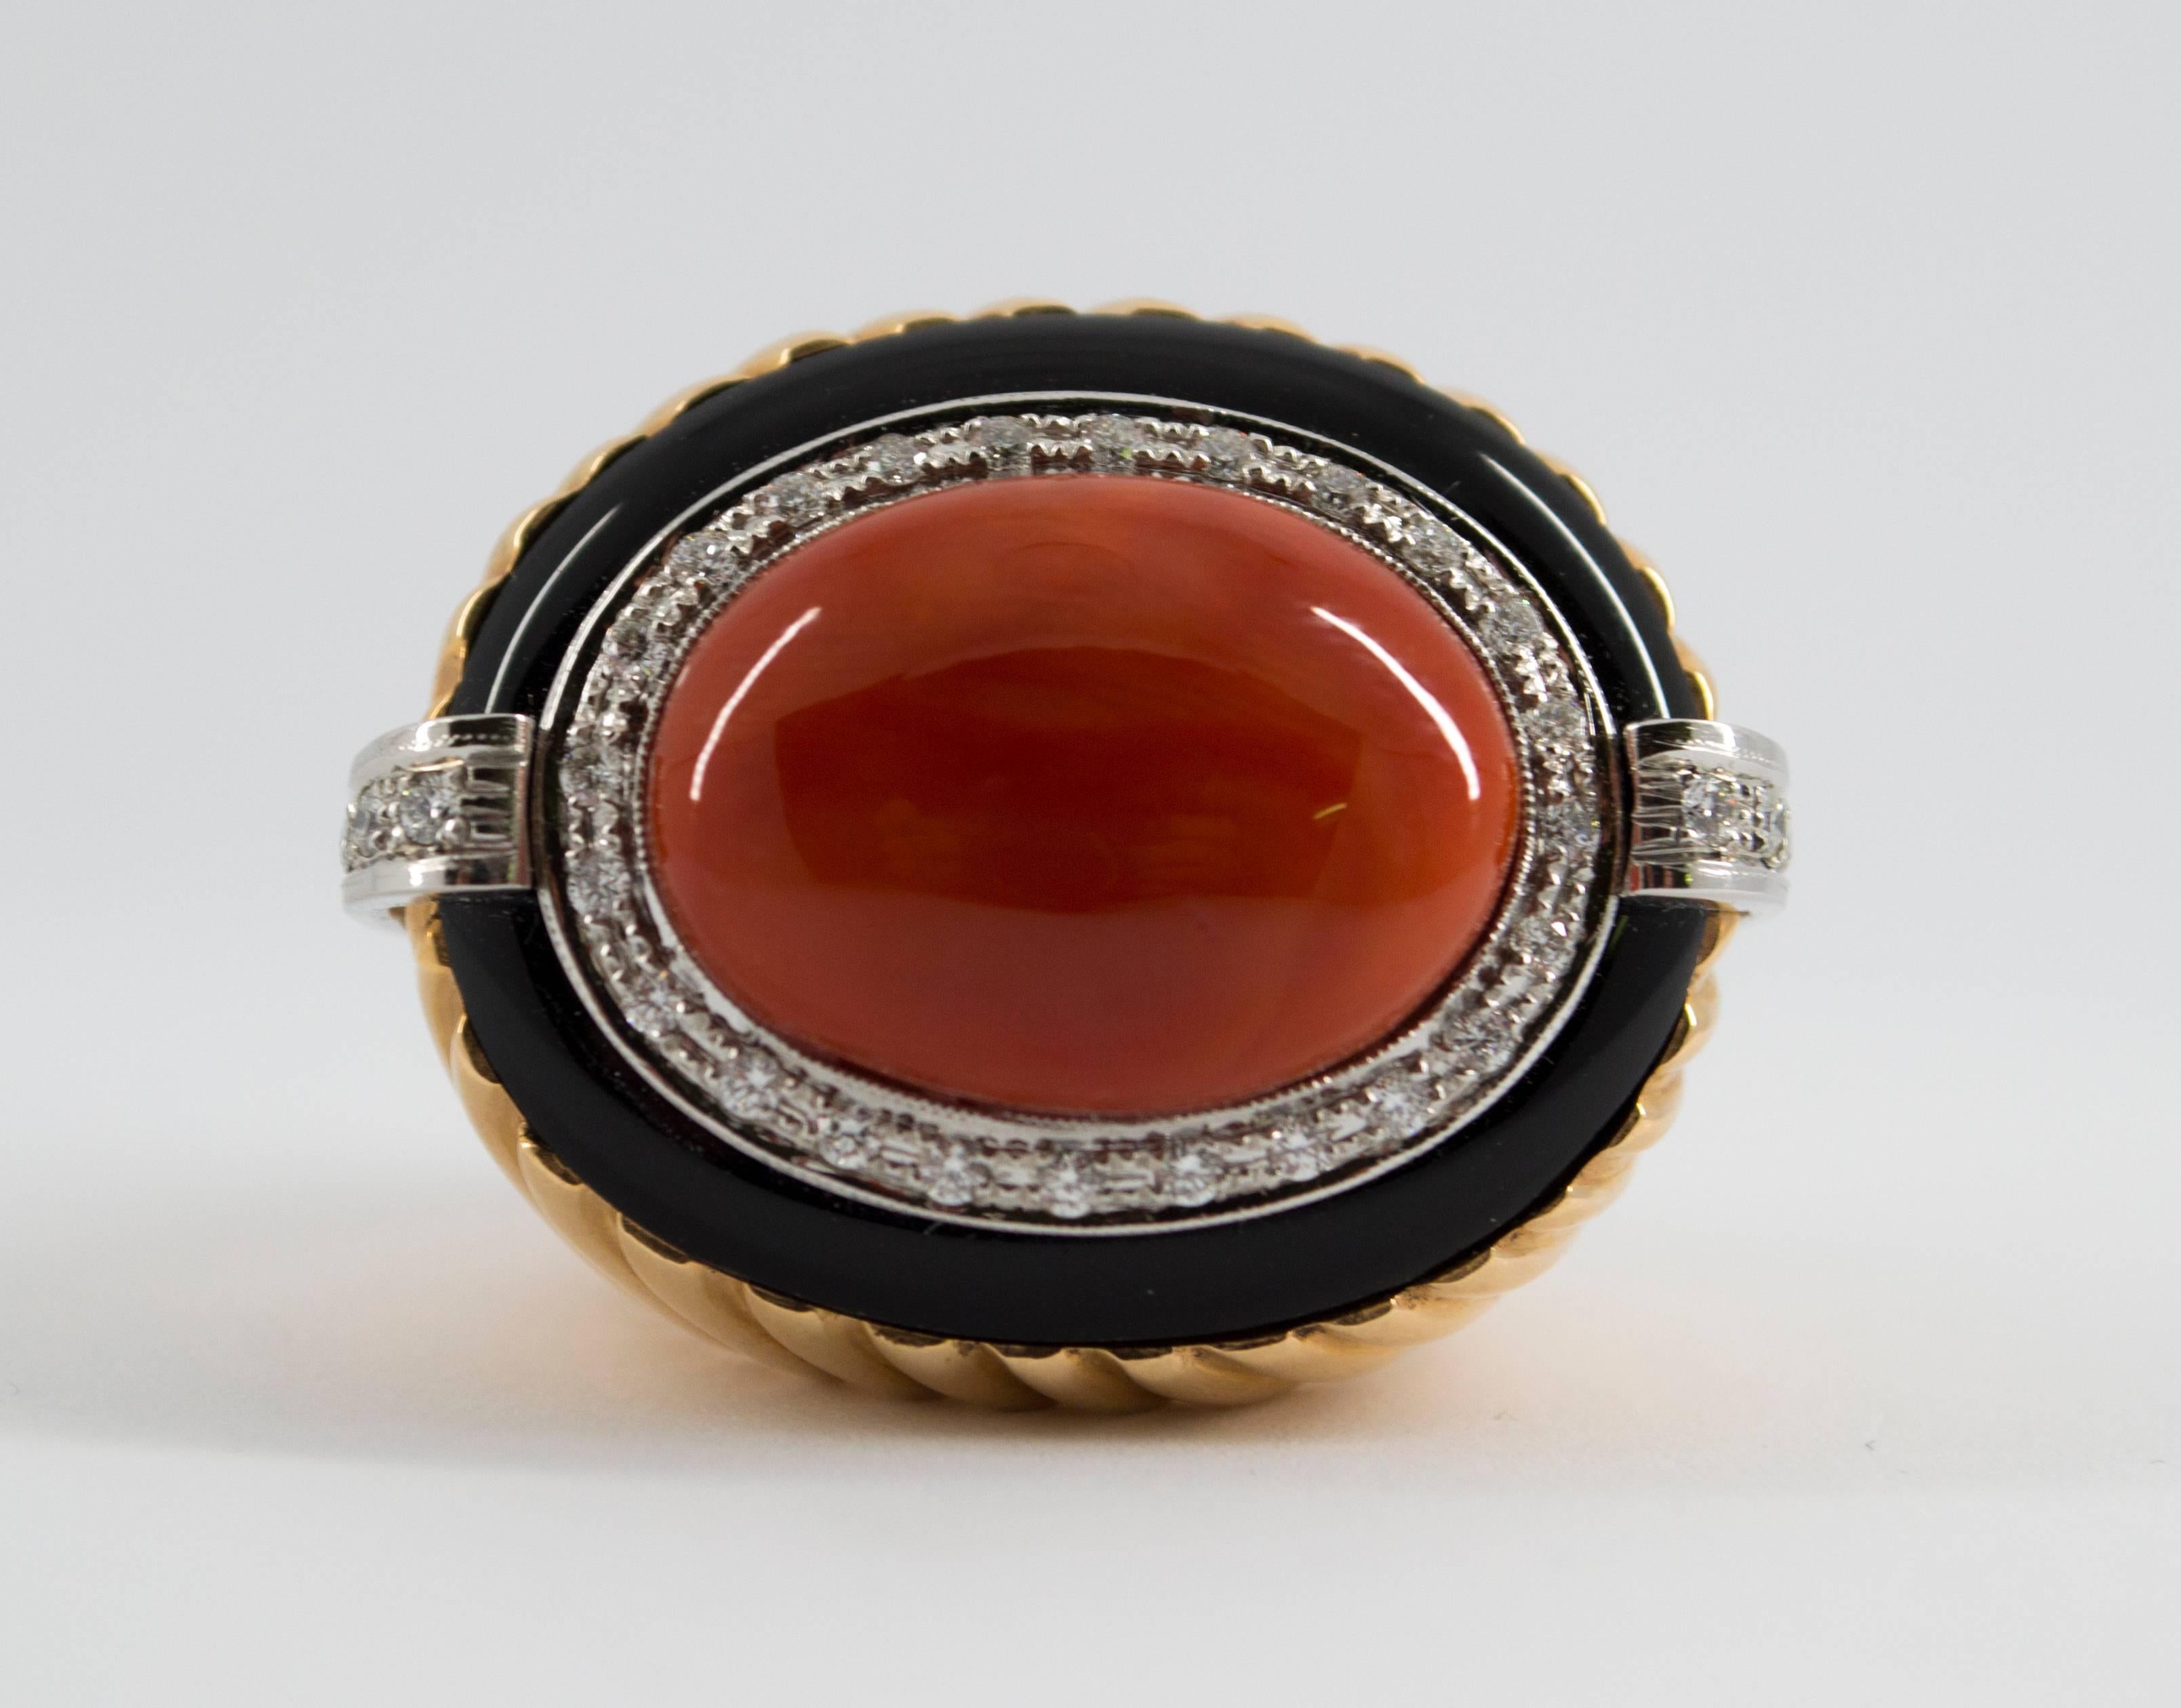 This Ring is made of 14K Yellow Gold.
This Ring has 0.50 Carats of Diamonds.
This Ring has also a big Red Mediterranean (Sardinia, Italy) Coral and Onyx.
This Ring is inspired by Renaissance Style.
Size ITA: 17 USA: 8
We're a workshop so every piece